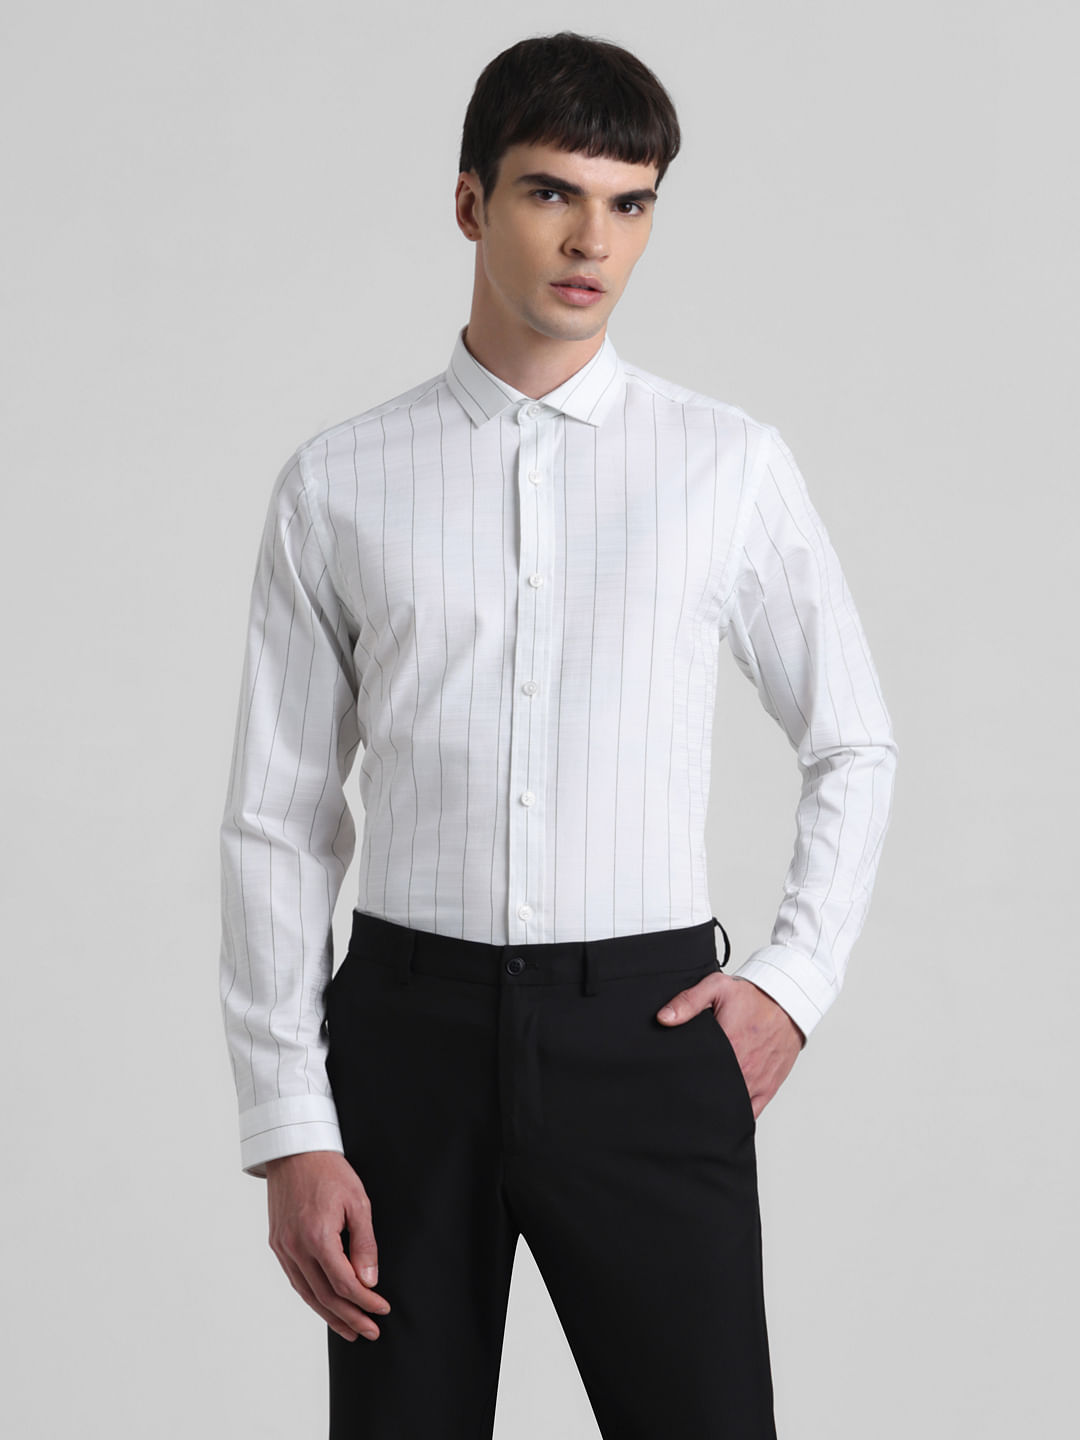 Urban elegant young man with a fashionable hairstyle in a classic black  shirt in a white